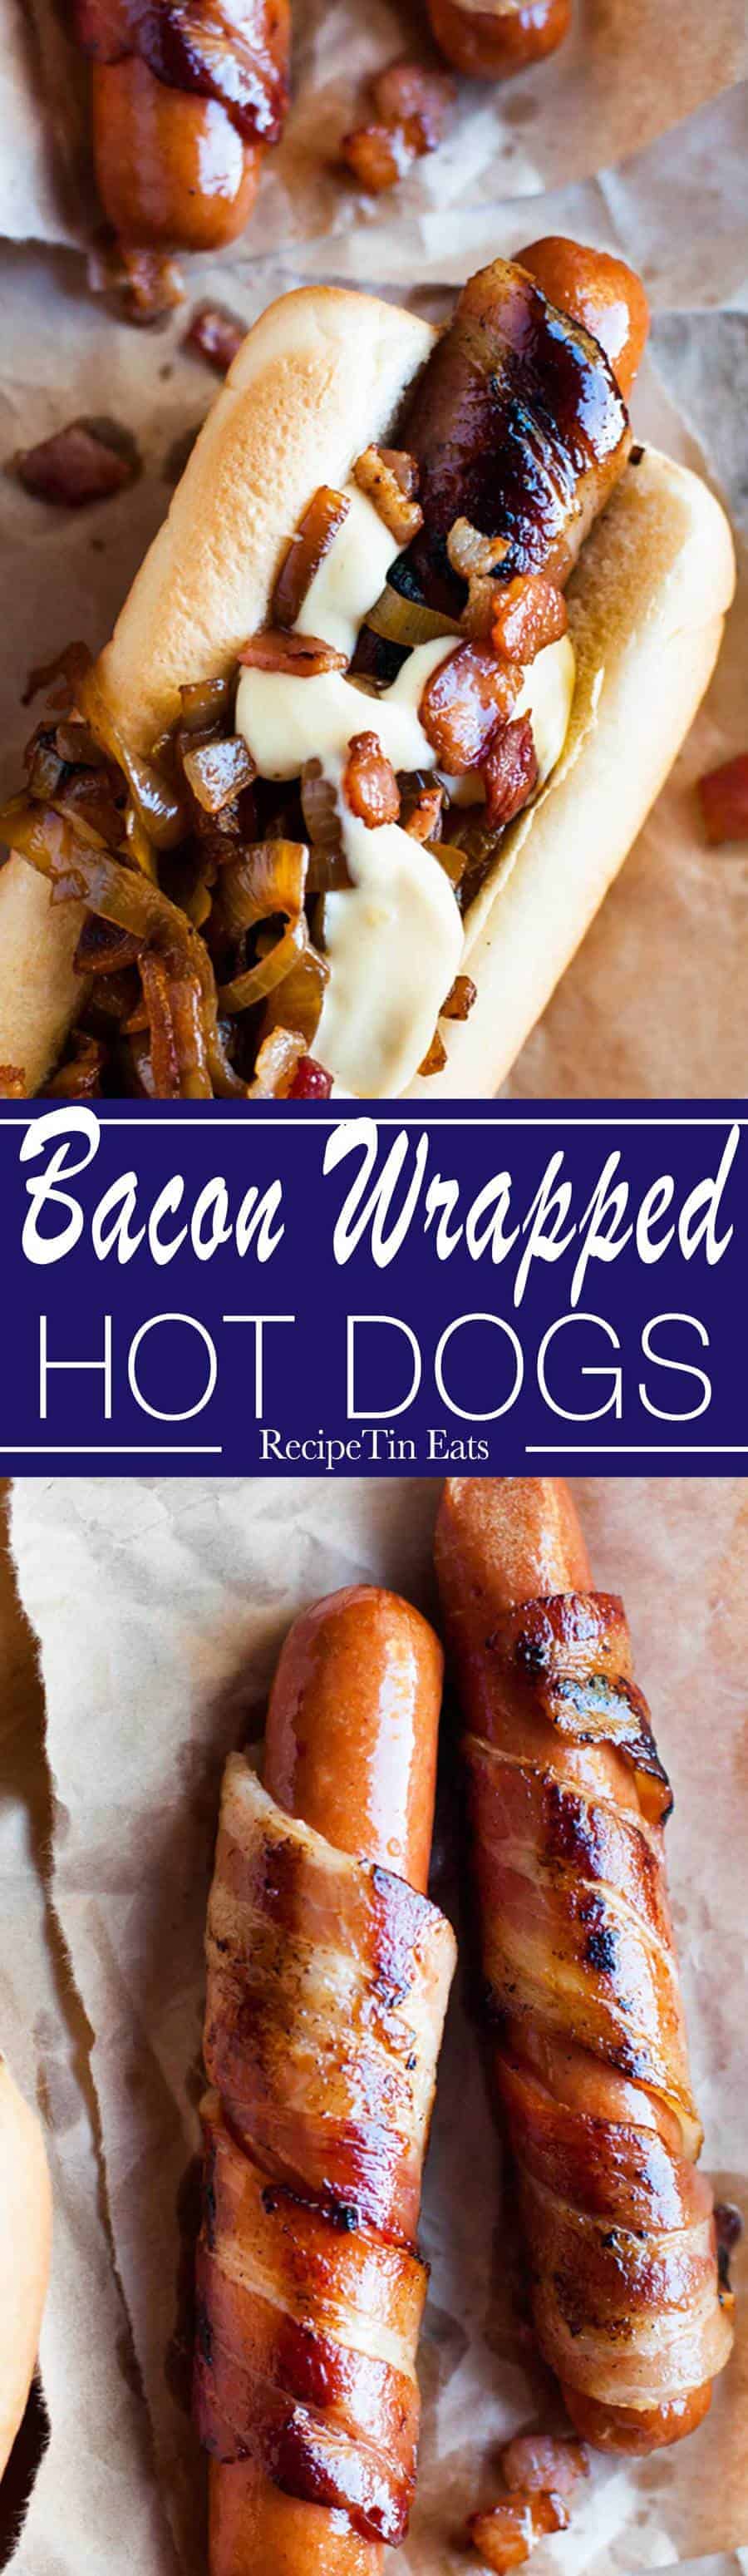 Bacon Wrapped Hot Dogs | Made these for Memorial Day last year, they were a HIT! That cheese sauce is a killer!